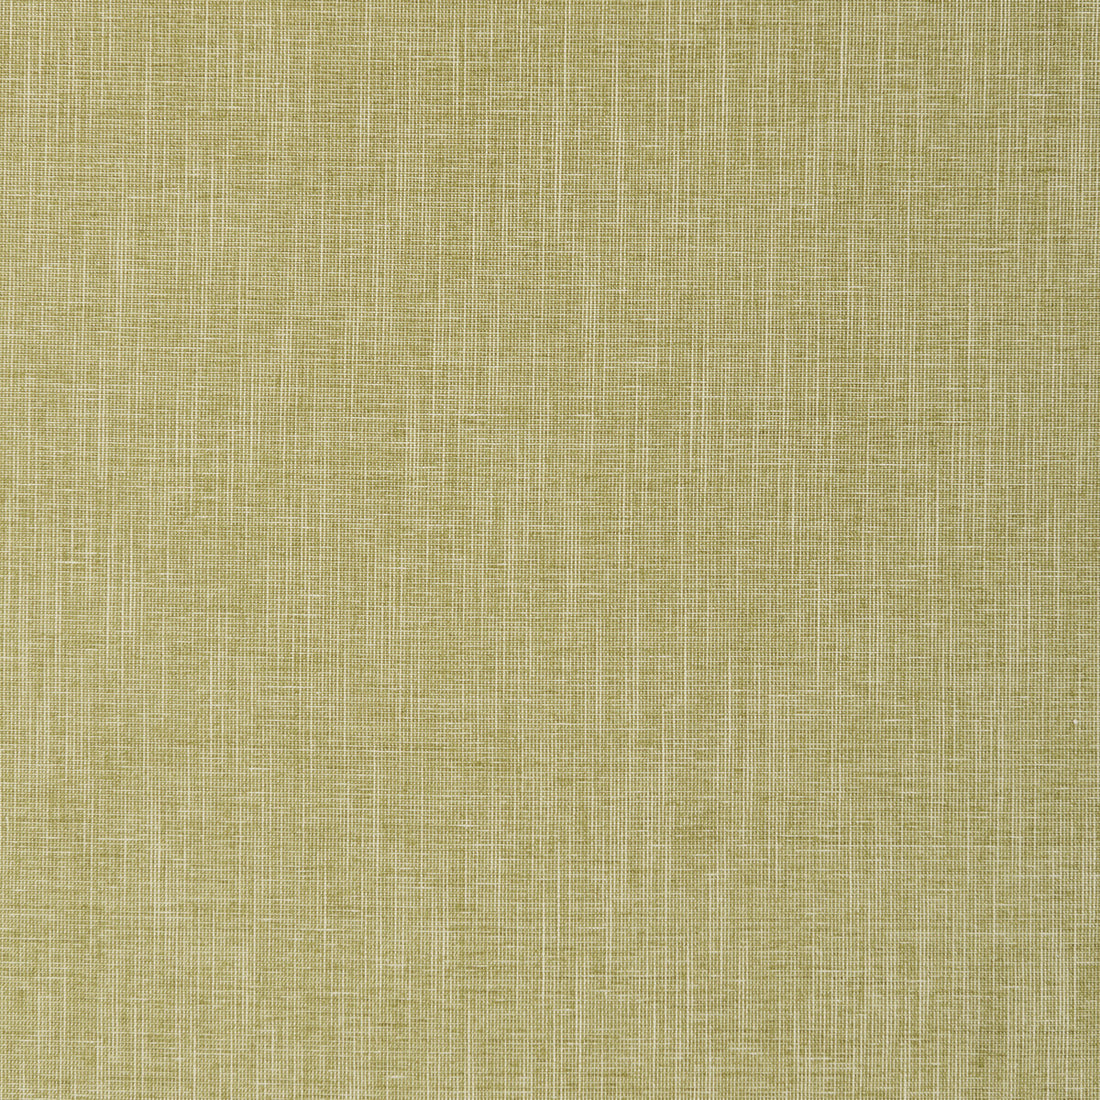 Kravet Smart fabric in 37078-23 color - pattern 37078.23.0 - by Kravet Smart in the Trio Textures collection